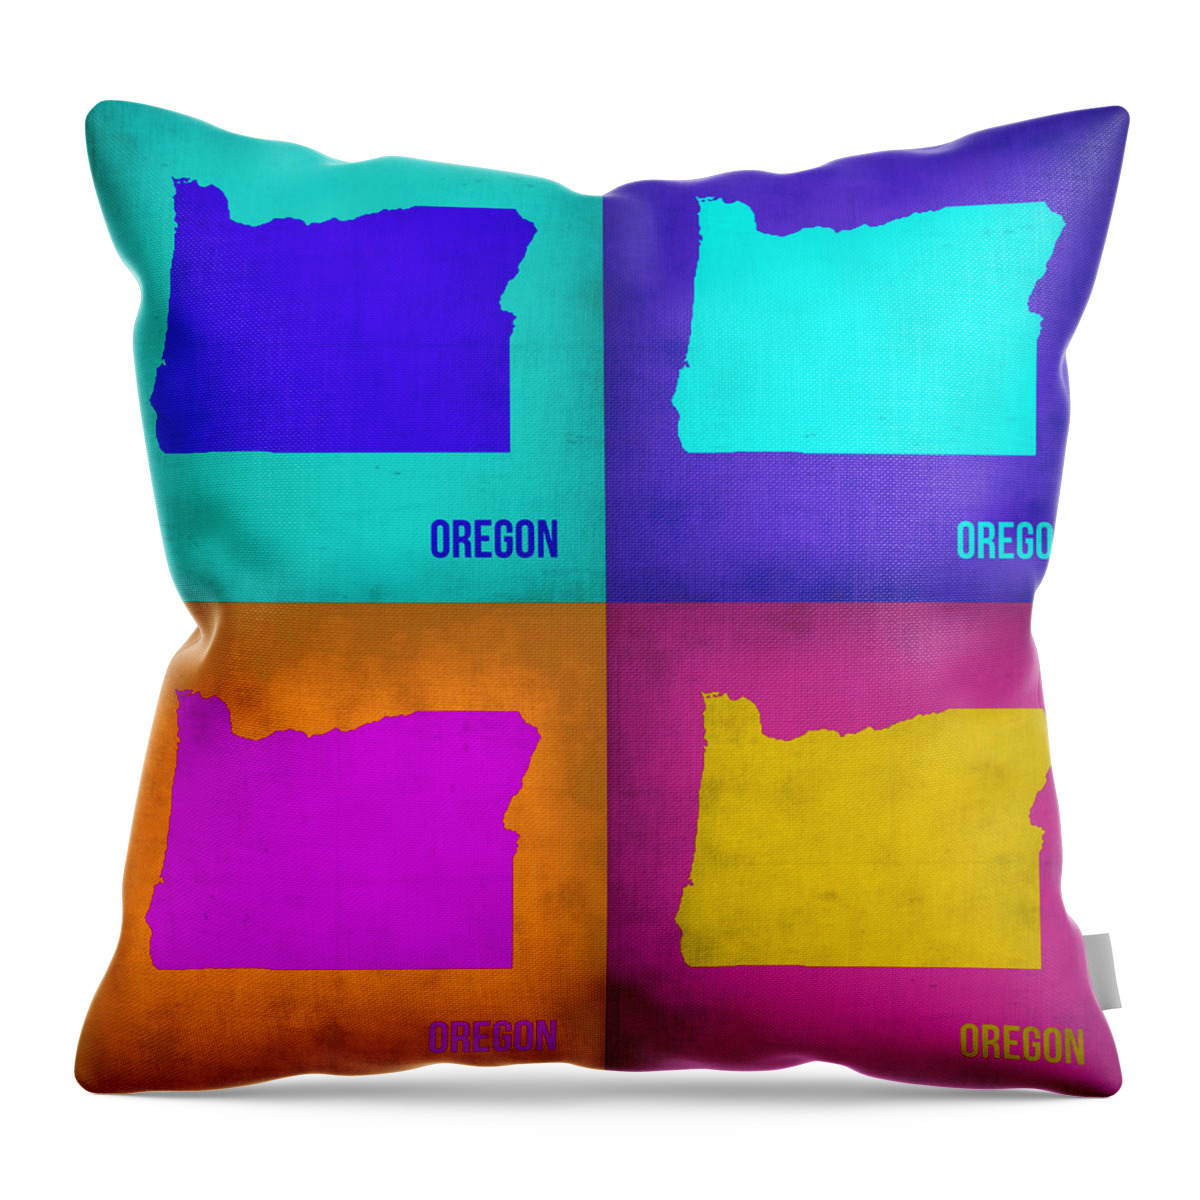 Oregon Map Throw Pillow featuring the painting Oregon Pop Art Map 1 by Naxart Studio